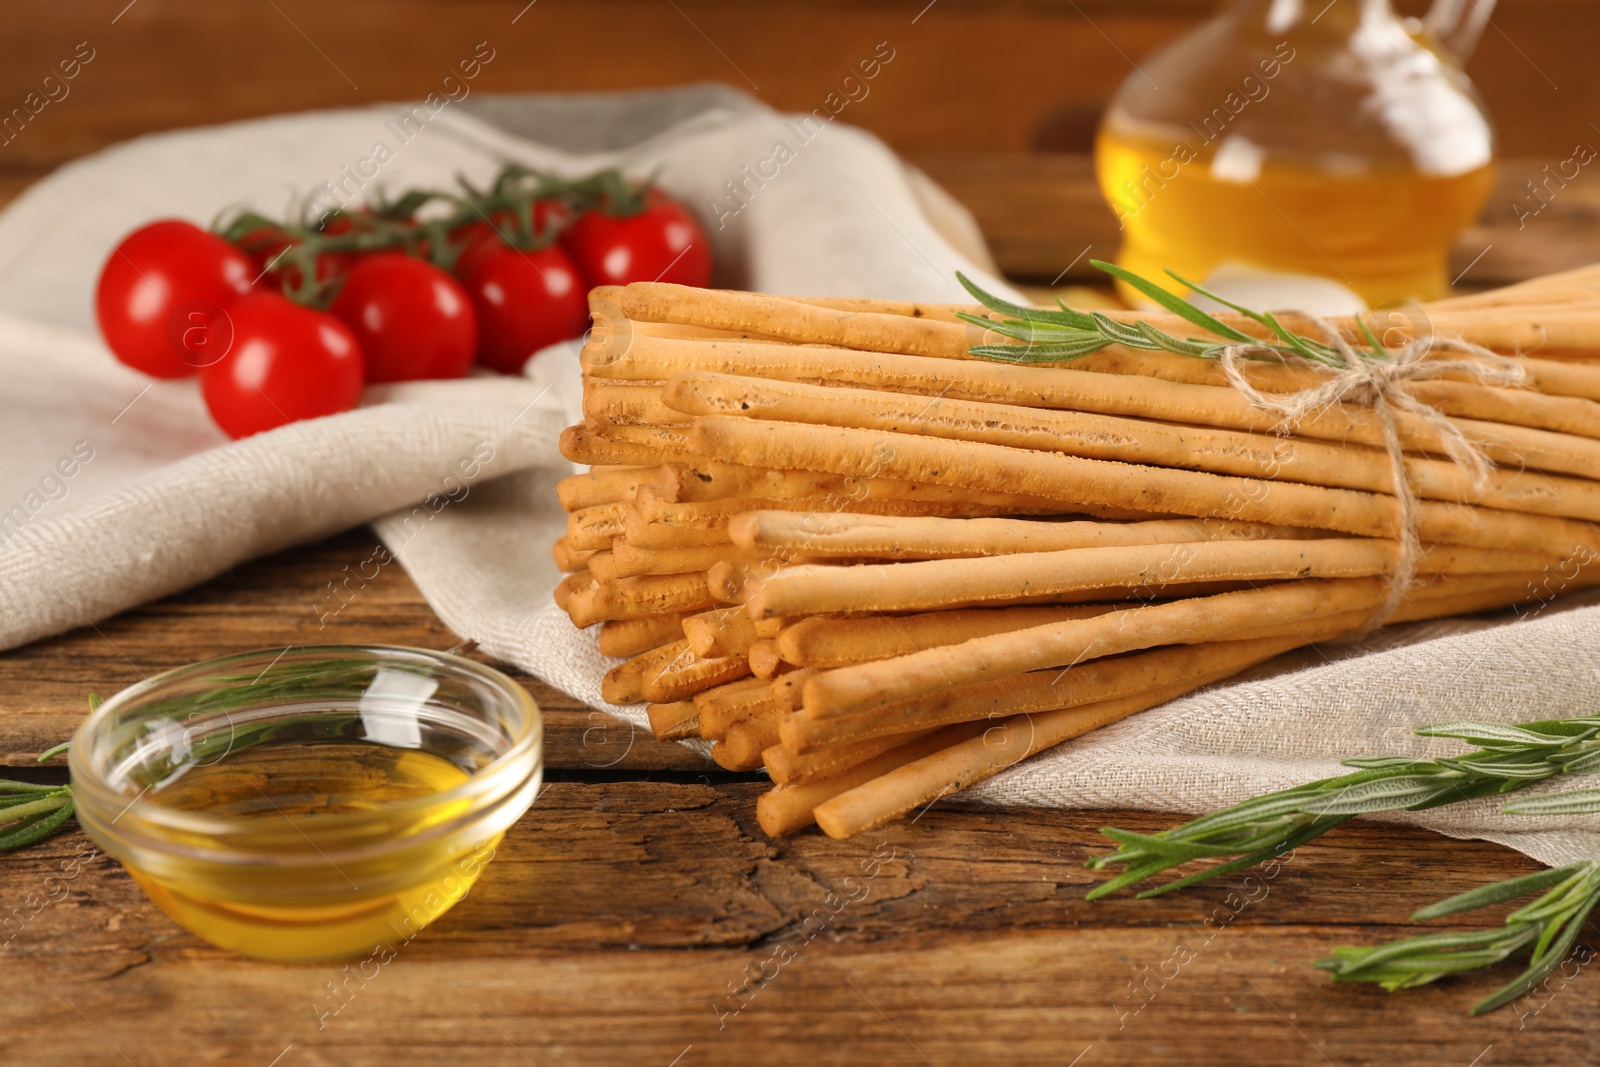 Photo of Delicious grissini sticks, oil, rosemary and tomatoes on wooden table